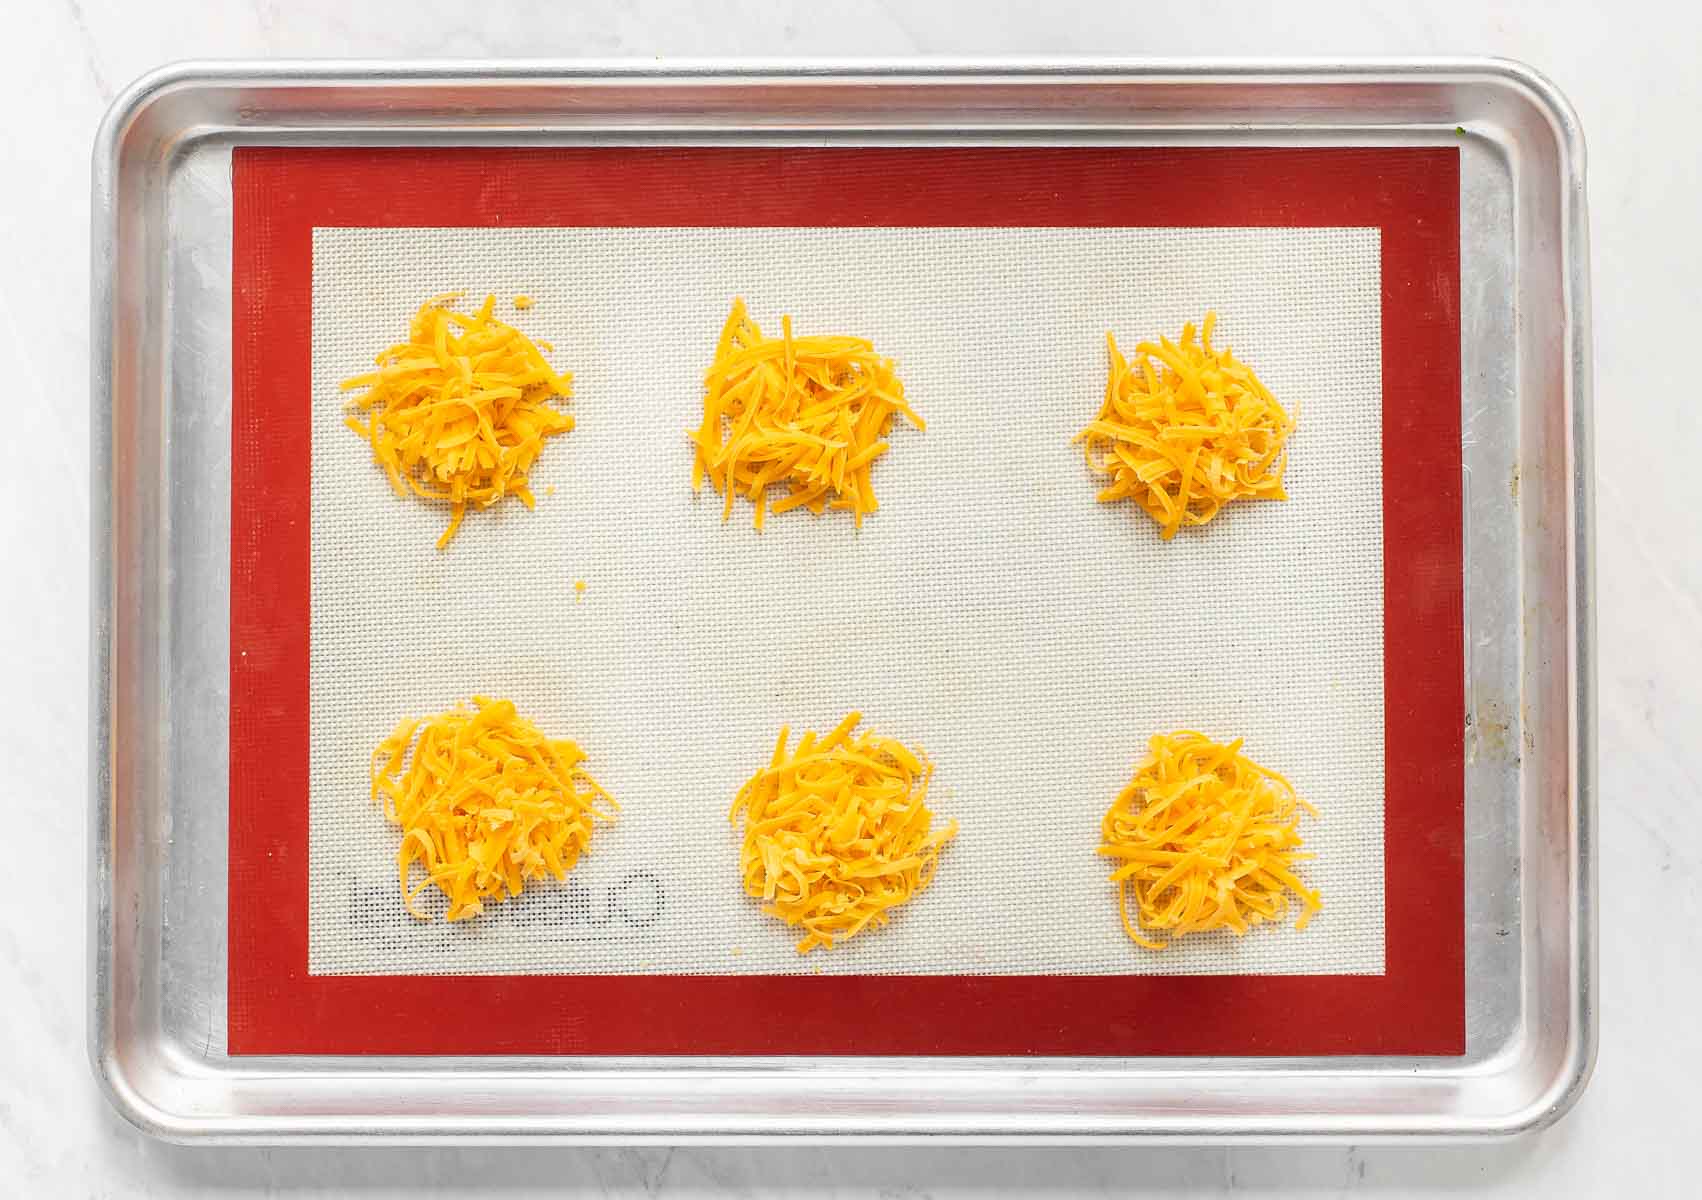 Grated cheddar on a baking sheet.